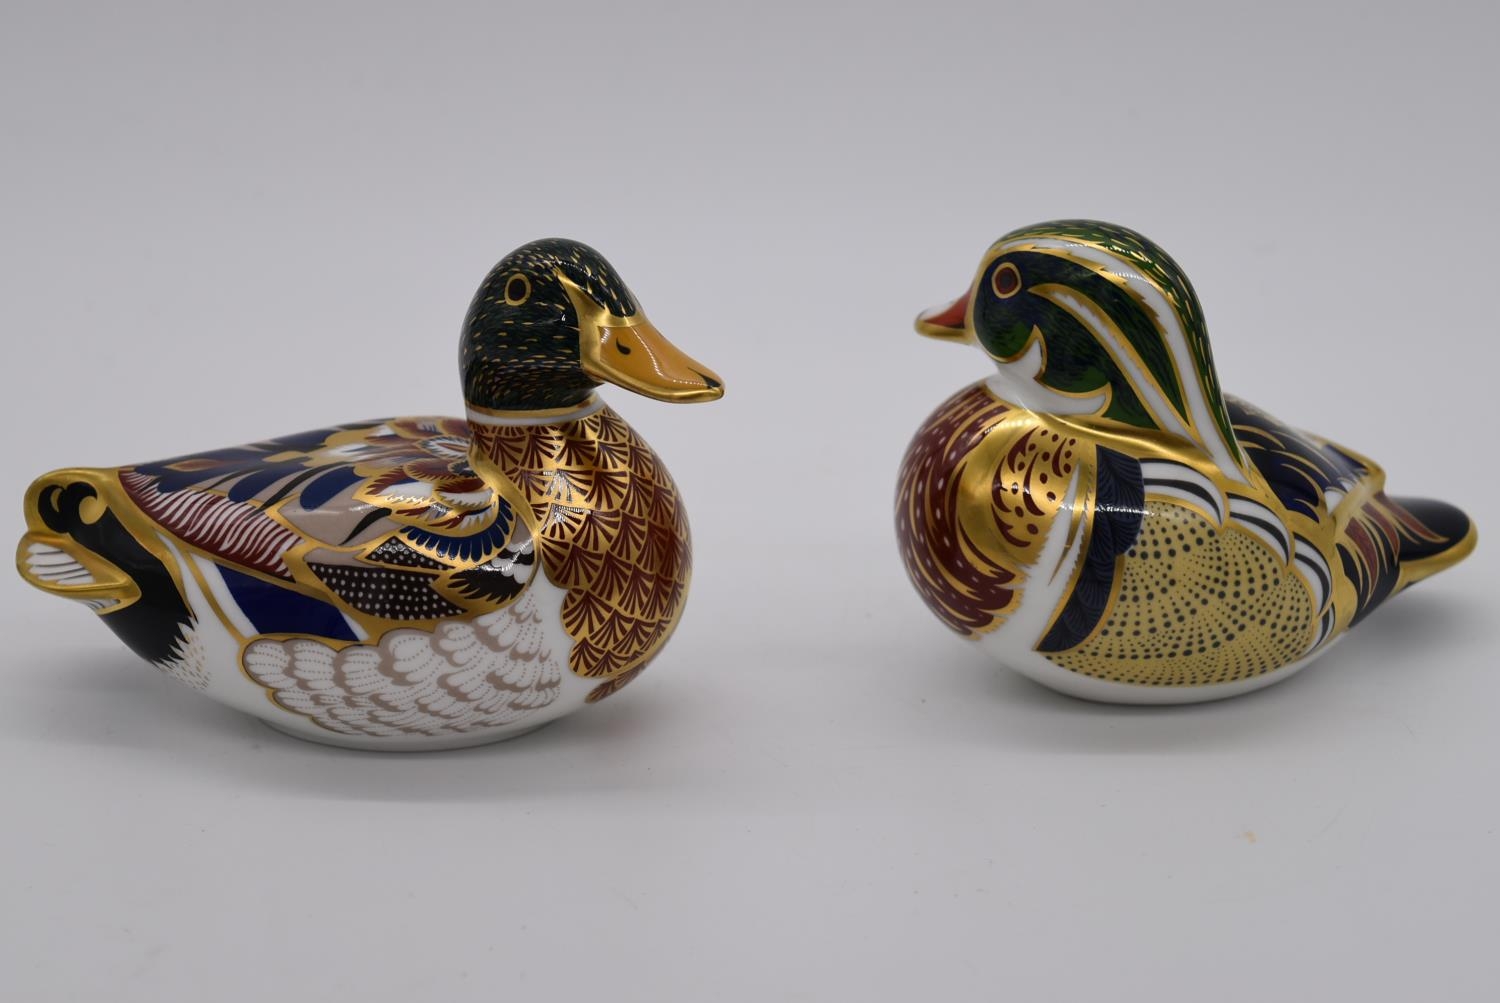 Two Royal Crown Derby porcelain paperweights, a Carolina duck and a Mallard duck, each with gold